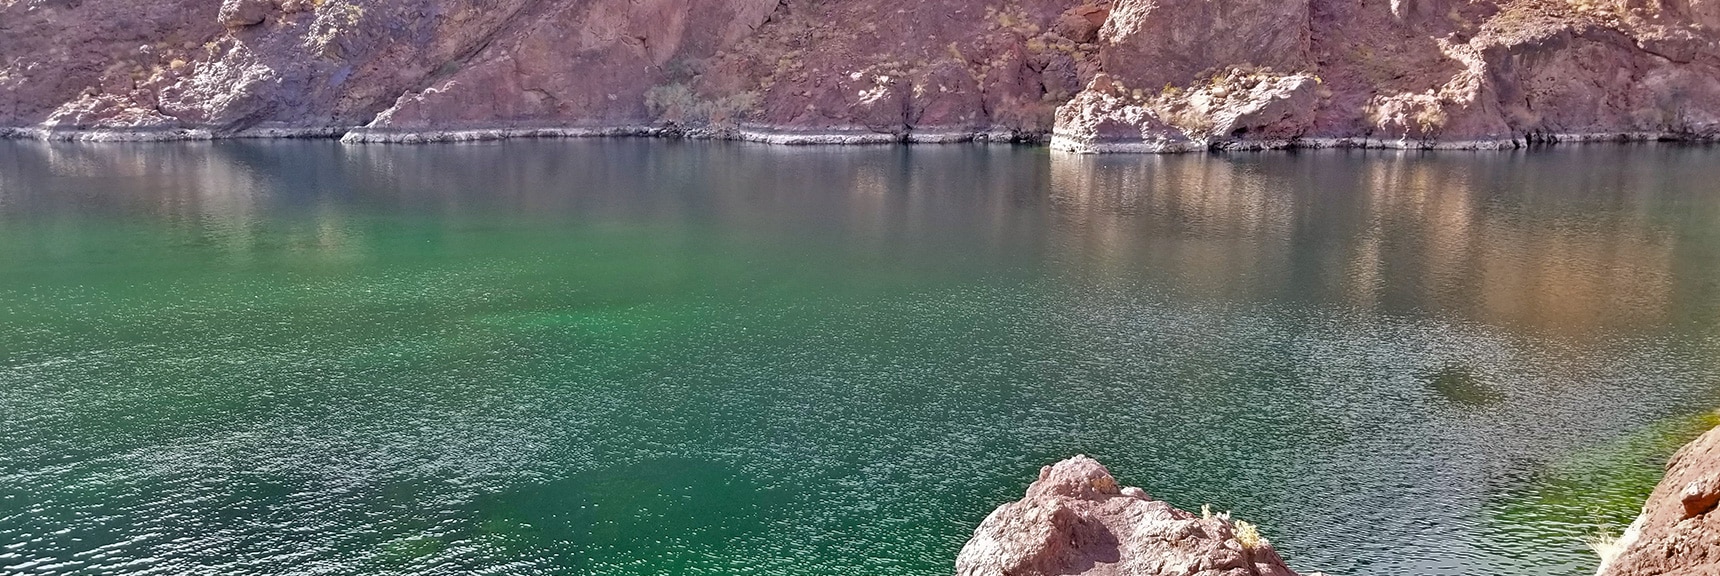 Peaceful, Turquoise Colorado River. Water Supply to Southwest U.S. | Arizona Hot Spring | Liberty Bell Arch | Lake Mead National Recreation Area, Arizona